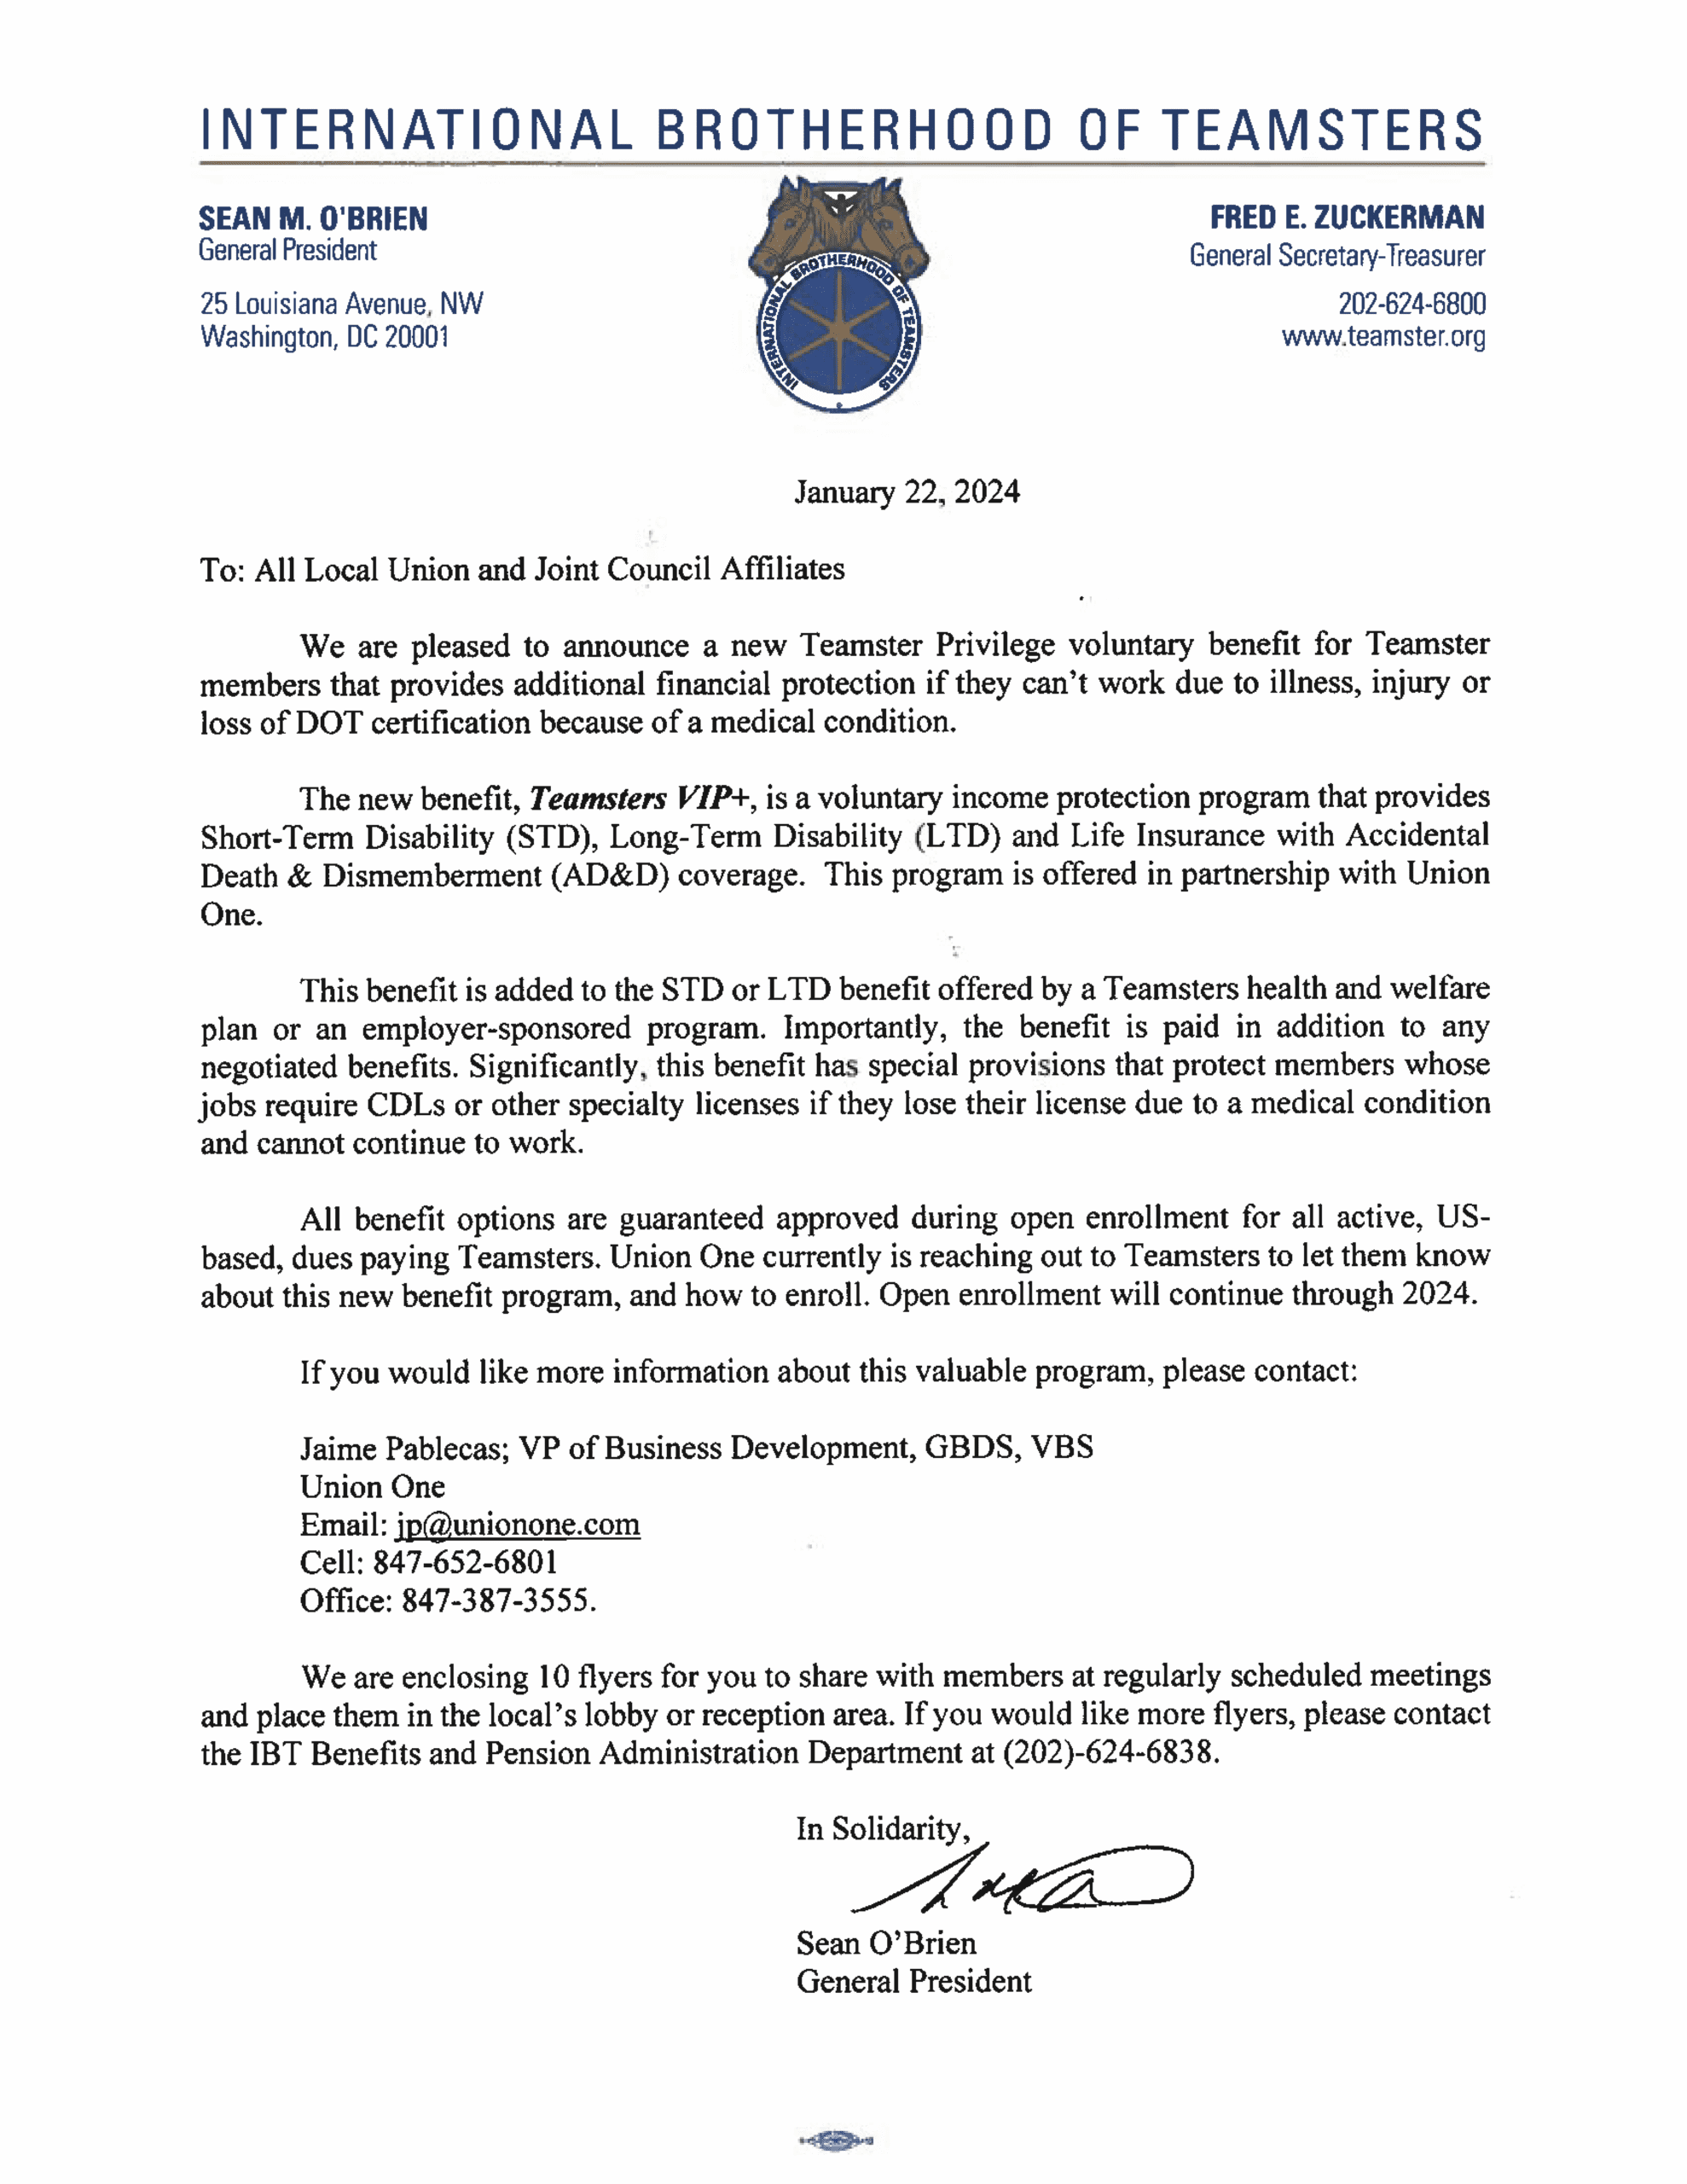 Teamster Privilege Announcement, Page 1